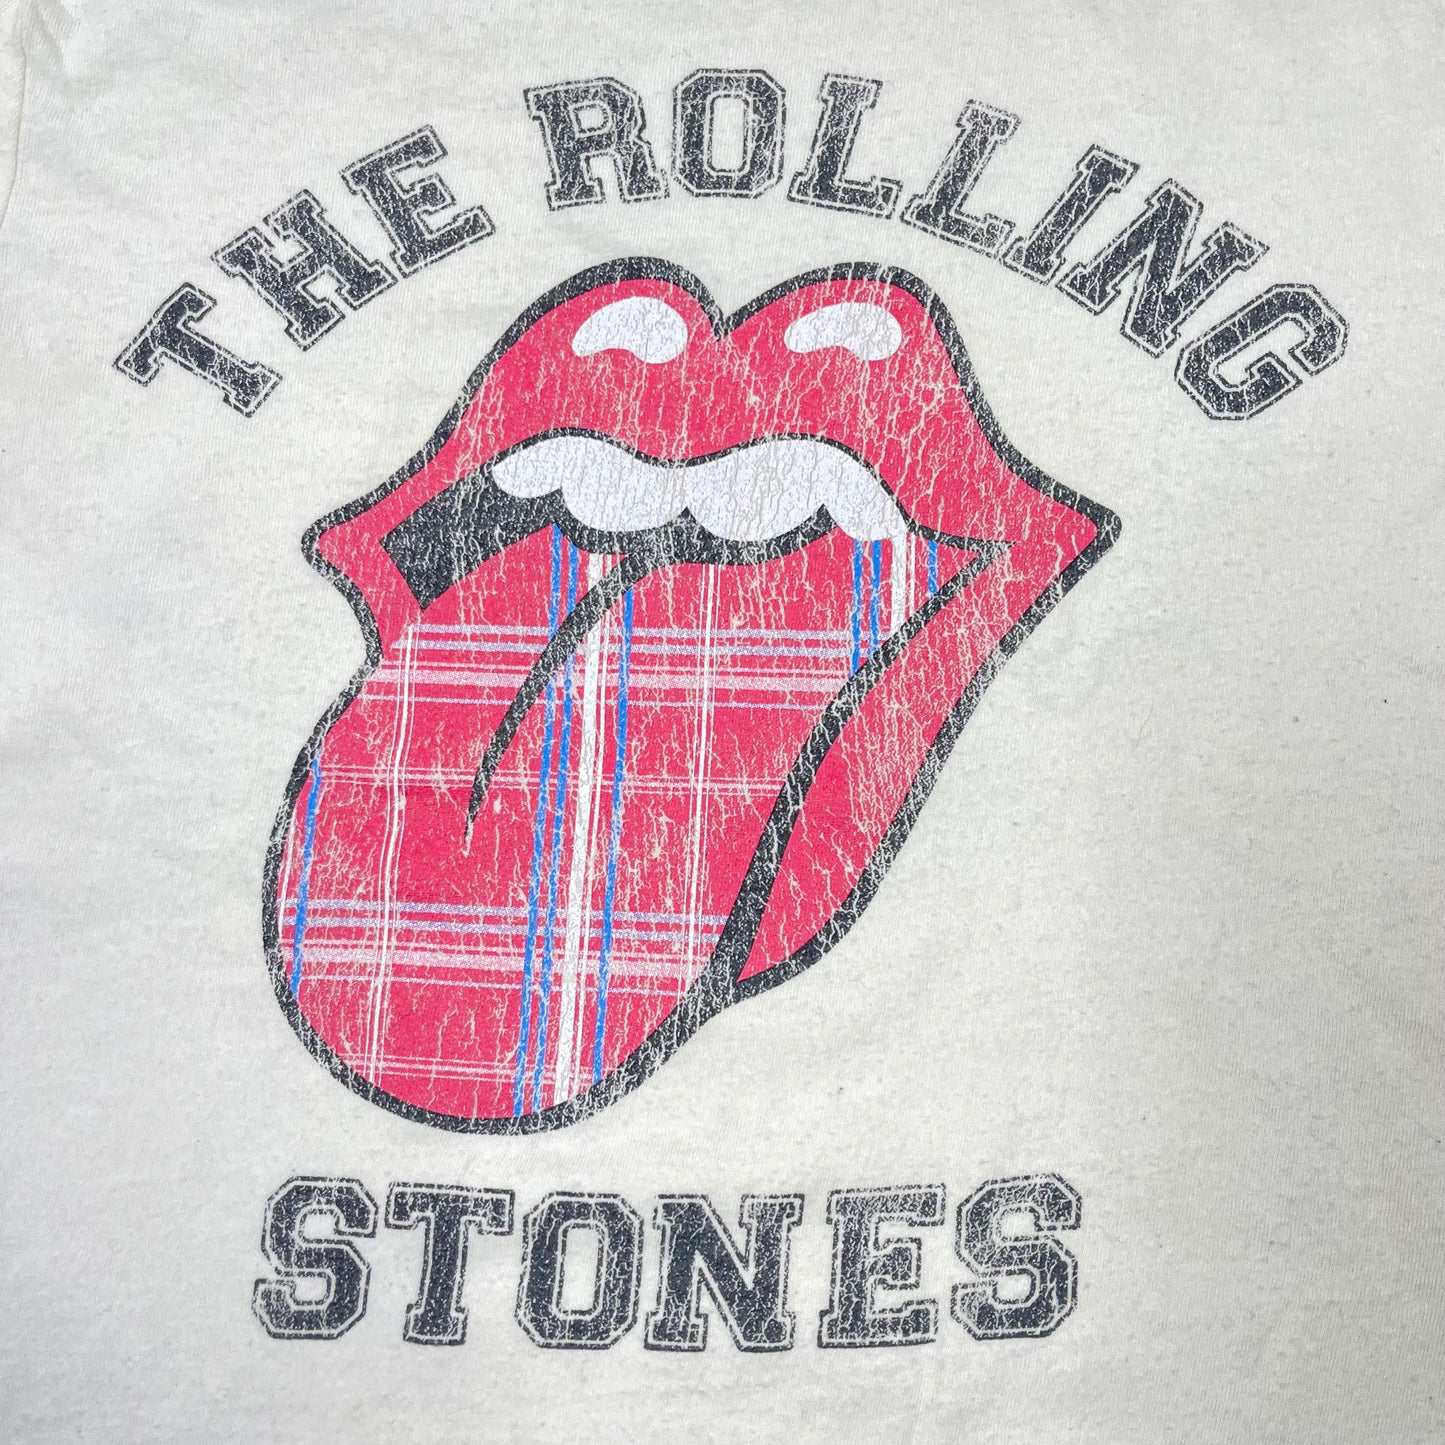 THRIFTED “THE ROLLING STONES” LONG SLEEVE